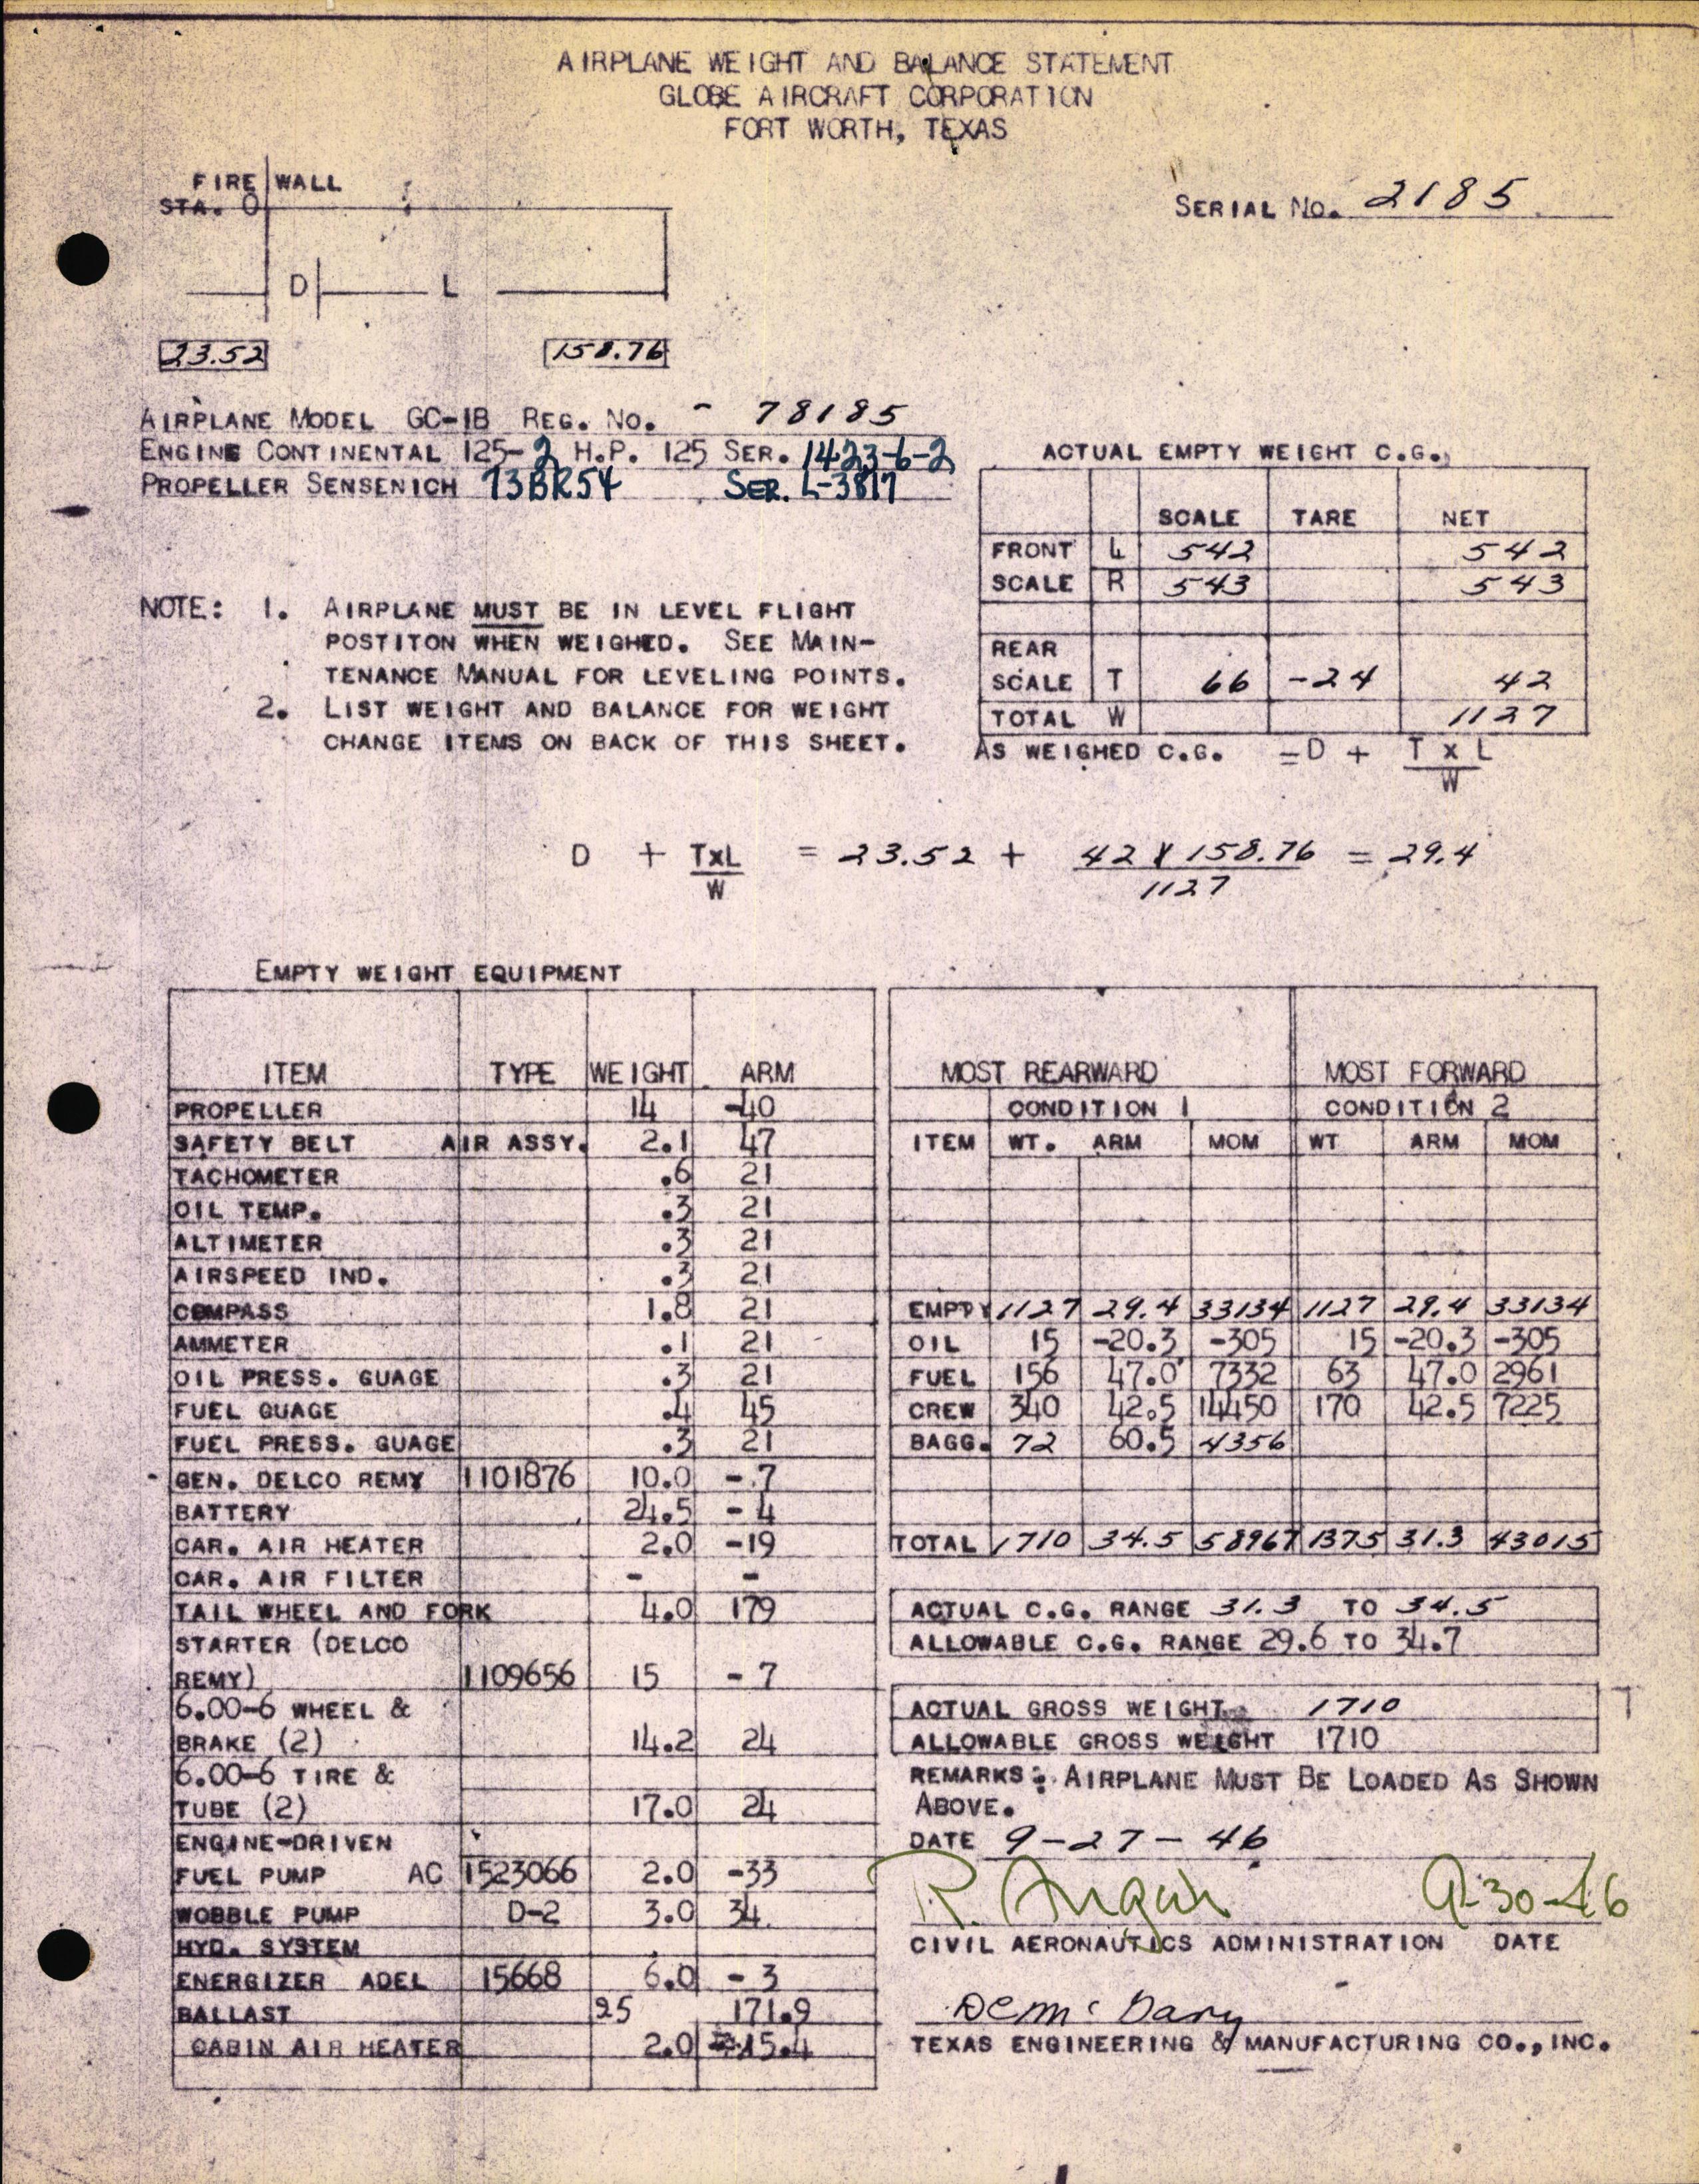 Sample page 1 from AirCorps Library document: Technical Information for Serial Number 2185